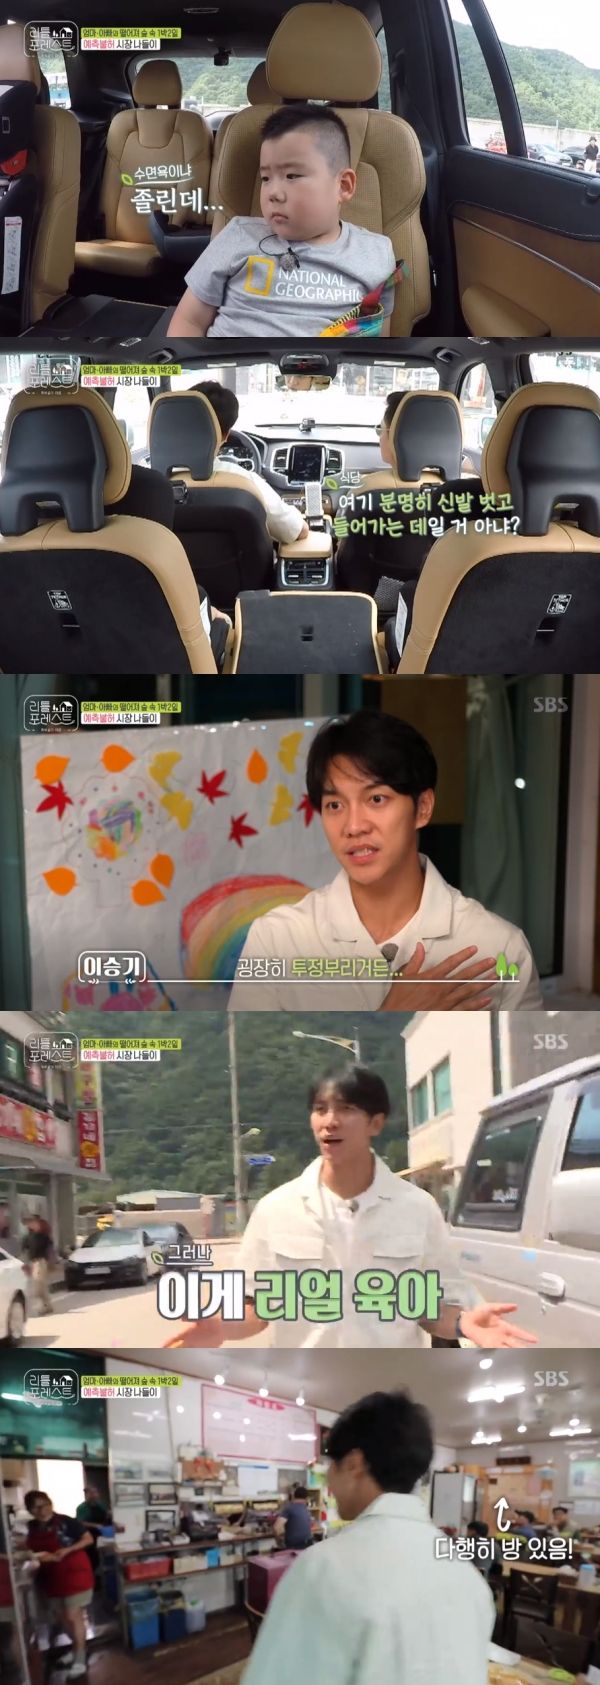 Lee Seung-gi has spoken out about his parenting grievancesOn the 17th, SBS Little Forest: Summer of the Blossom (hereinafter referred to as Little Forest), Little Lee, Lee Seung-gi, Lee Seo-jin, Park Na-rae and Jung So-min were shown.On the show, Little fell asleep while traveling in a car, and when they arrived at their destination, they could not wake up and made Lee Seo-jin and Lee Seung-gi sad.Seeing tired children, Lee Seo-jin and Lee Seung-gi decided they would not be able to watch the market.Lee Seo-jin suggested, Lets go in and lay down and put him to bed; Lee Seung-gi agreed, adding, If you are tired, you are so tired.Lee Seung-gi, who was looking for a Restaurant to put his children to bed, said, If you have children, there is nothing that you think.Lee Seung-gi, who sought understanding in search of the store, jokingly added to Lee Seo-jin, I do not want to go out next time.On the other hand, unlike other children, Lee chose appetite rather than sleep bath and laughed.Lee Han, who was led by Park Na-raes chicken temptation, was attracted by the idea that he wanted to eat chicken legs as soon as he got out.